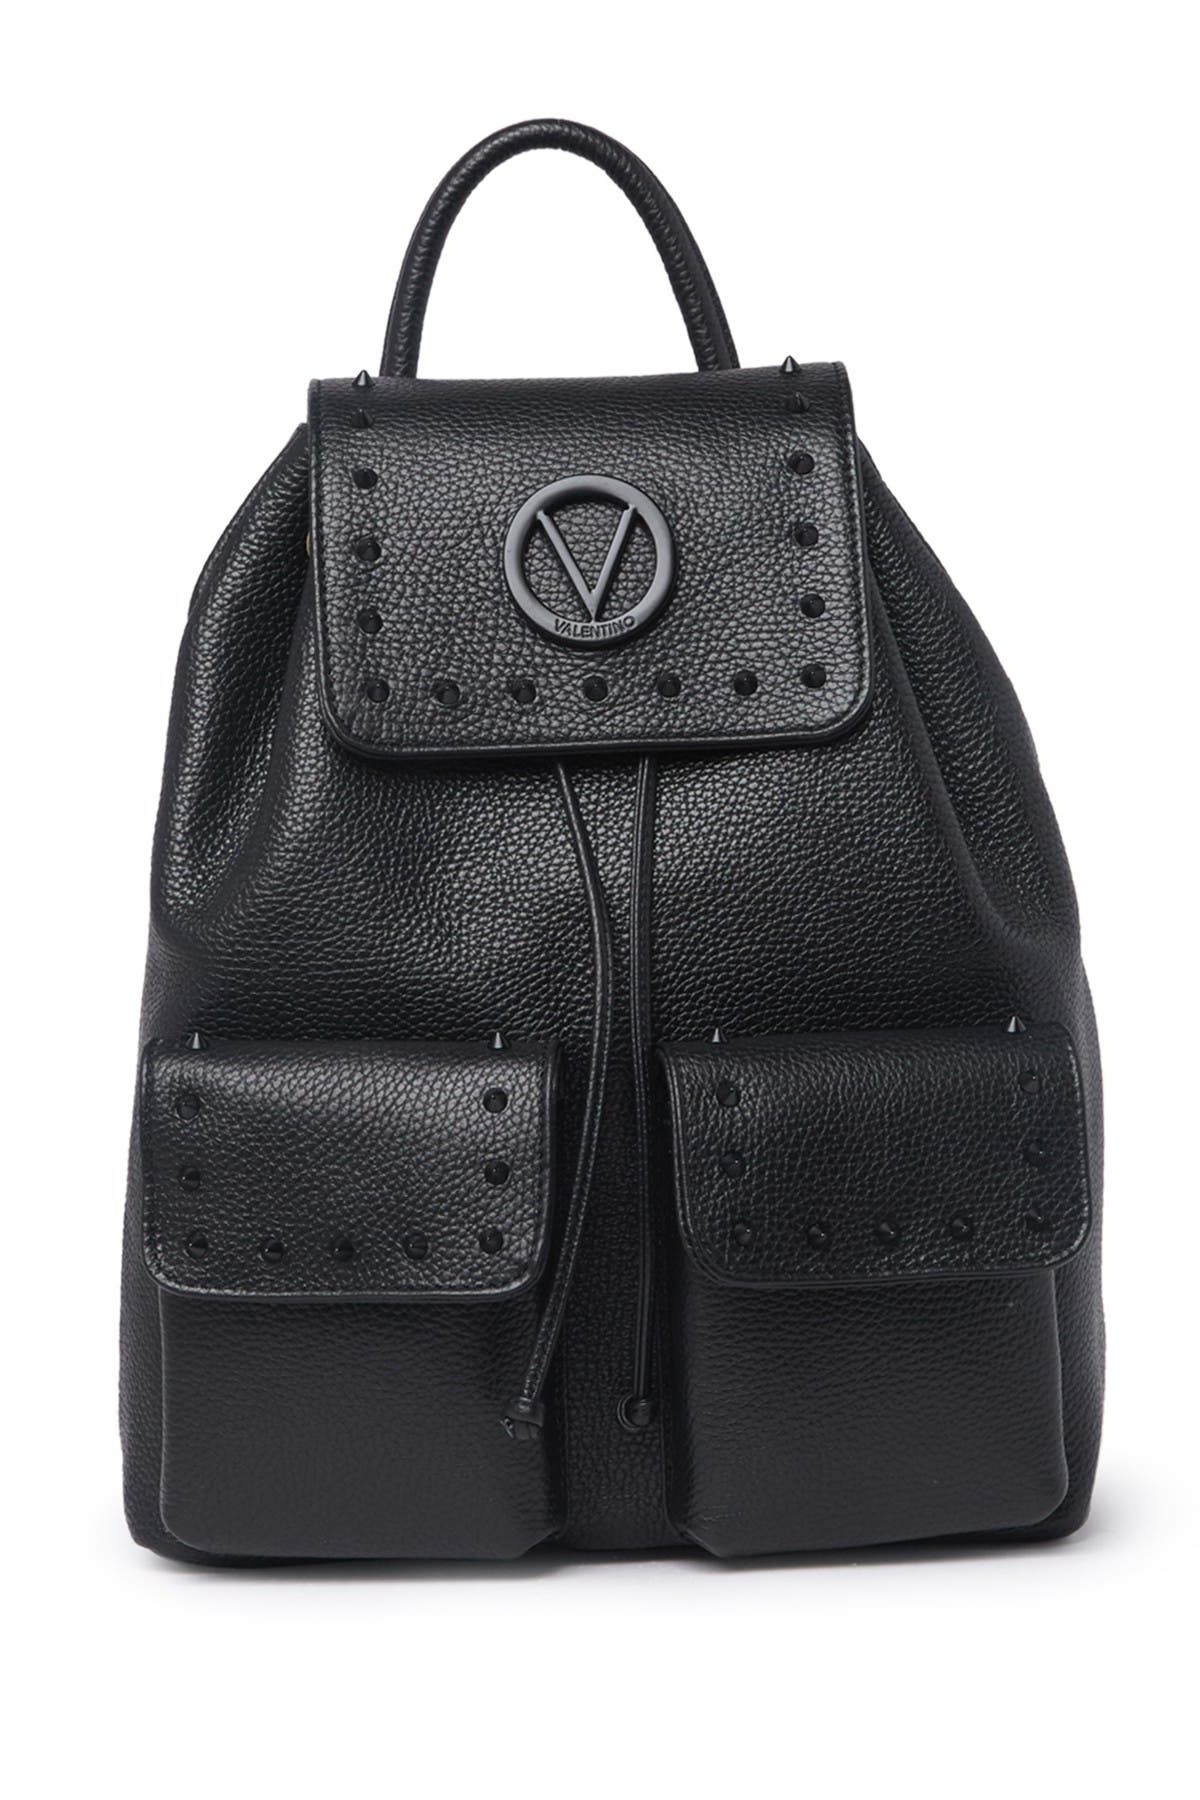 Valentino By Mario Valentino Simeon Leather Backpack In Black | ModeSens